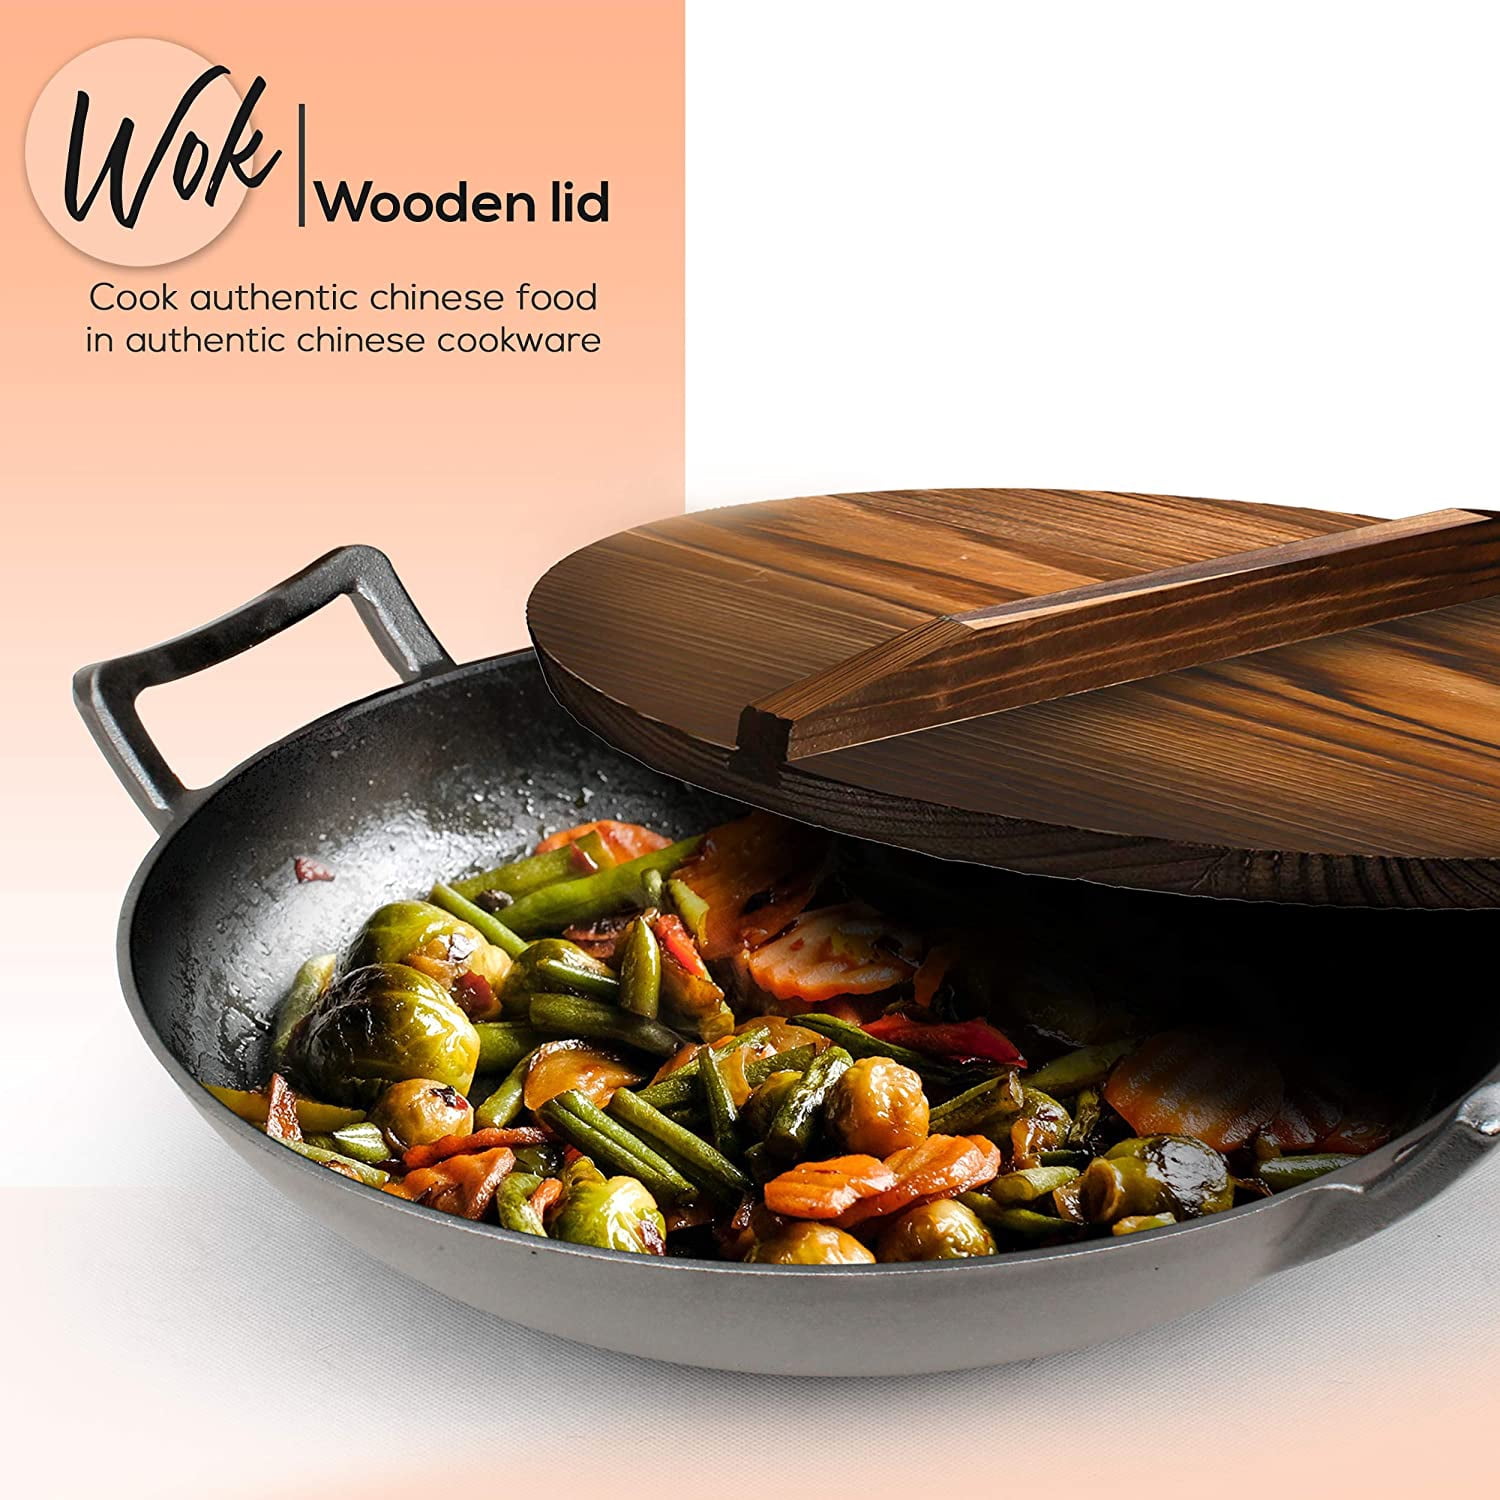 14 inch Lightweight Cast Iron Wok with Glass Lid Stir Fry Pan Wooden Handle Chef’s Pan Pre-Seasoned Nonstick for Chinese Japanese and Other Cooking